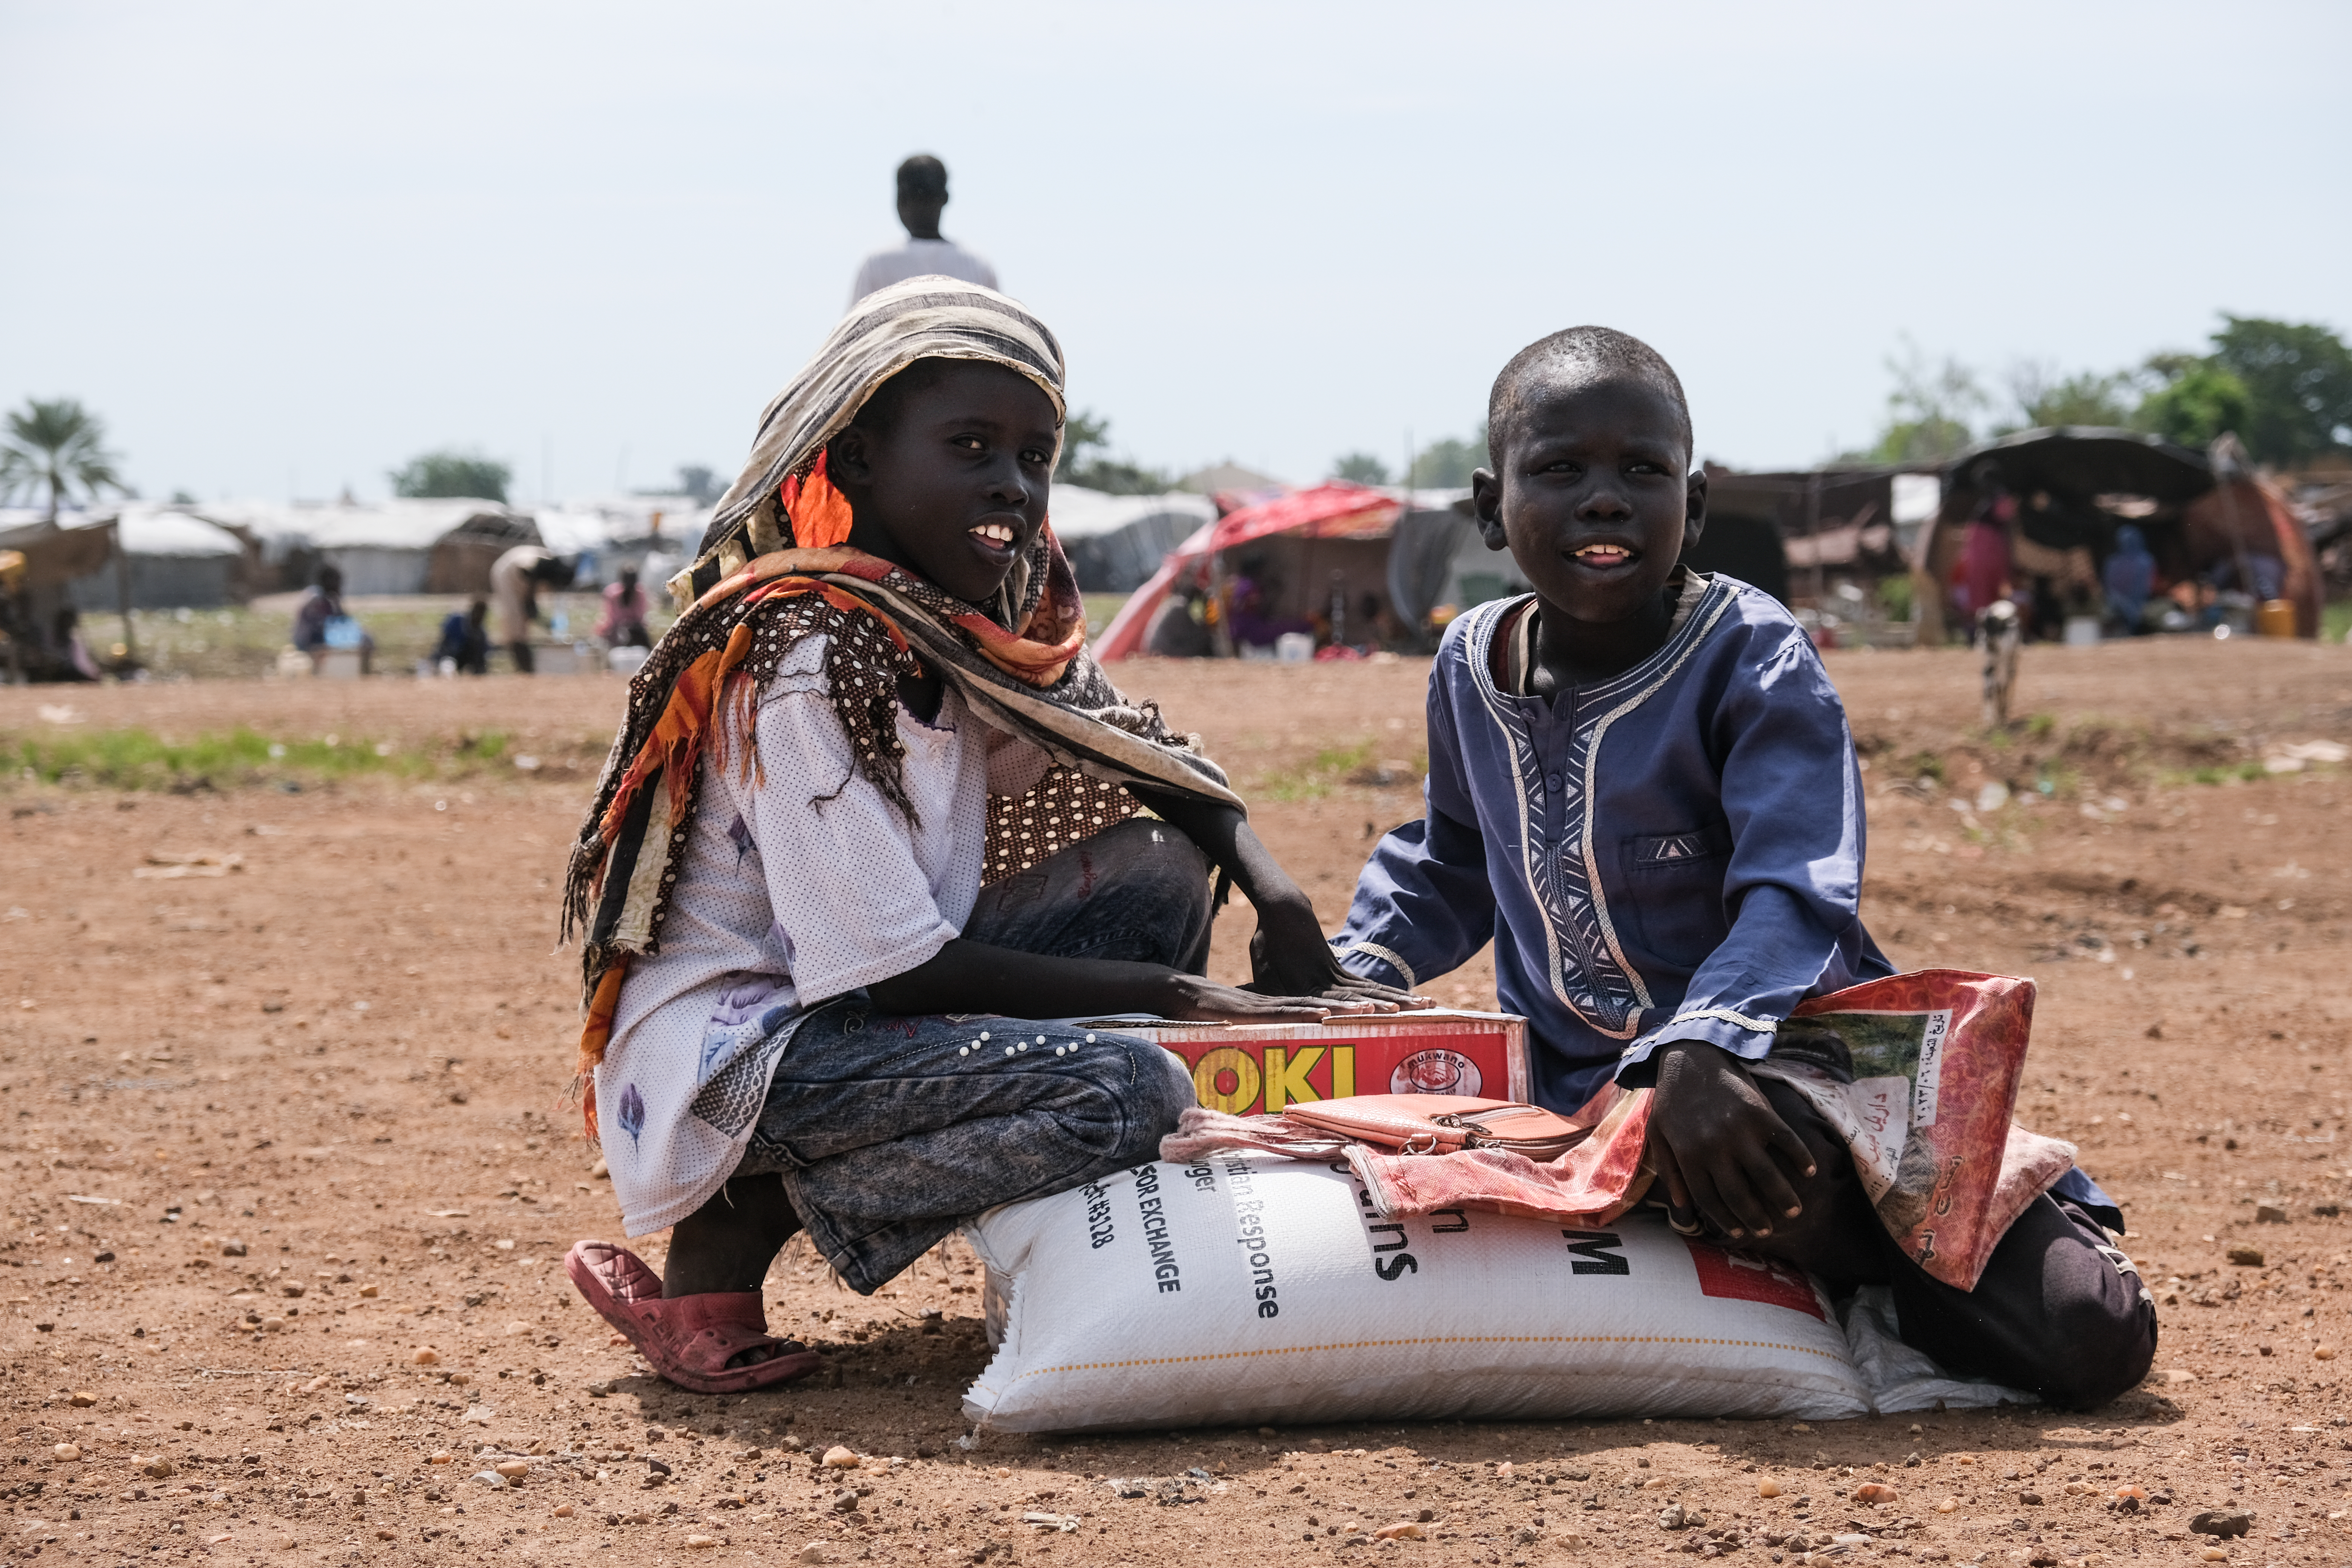 Zero Mawang Juch (left) and Sudan Koang Ruei at the distribution site with a portion of food supplies. Each bag of sorghum is about 15kgs, so it is heavy for program participants to carry on their heads and back to their homes.